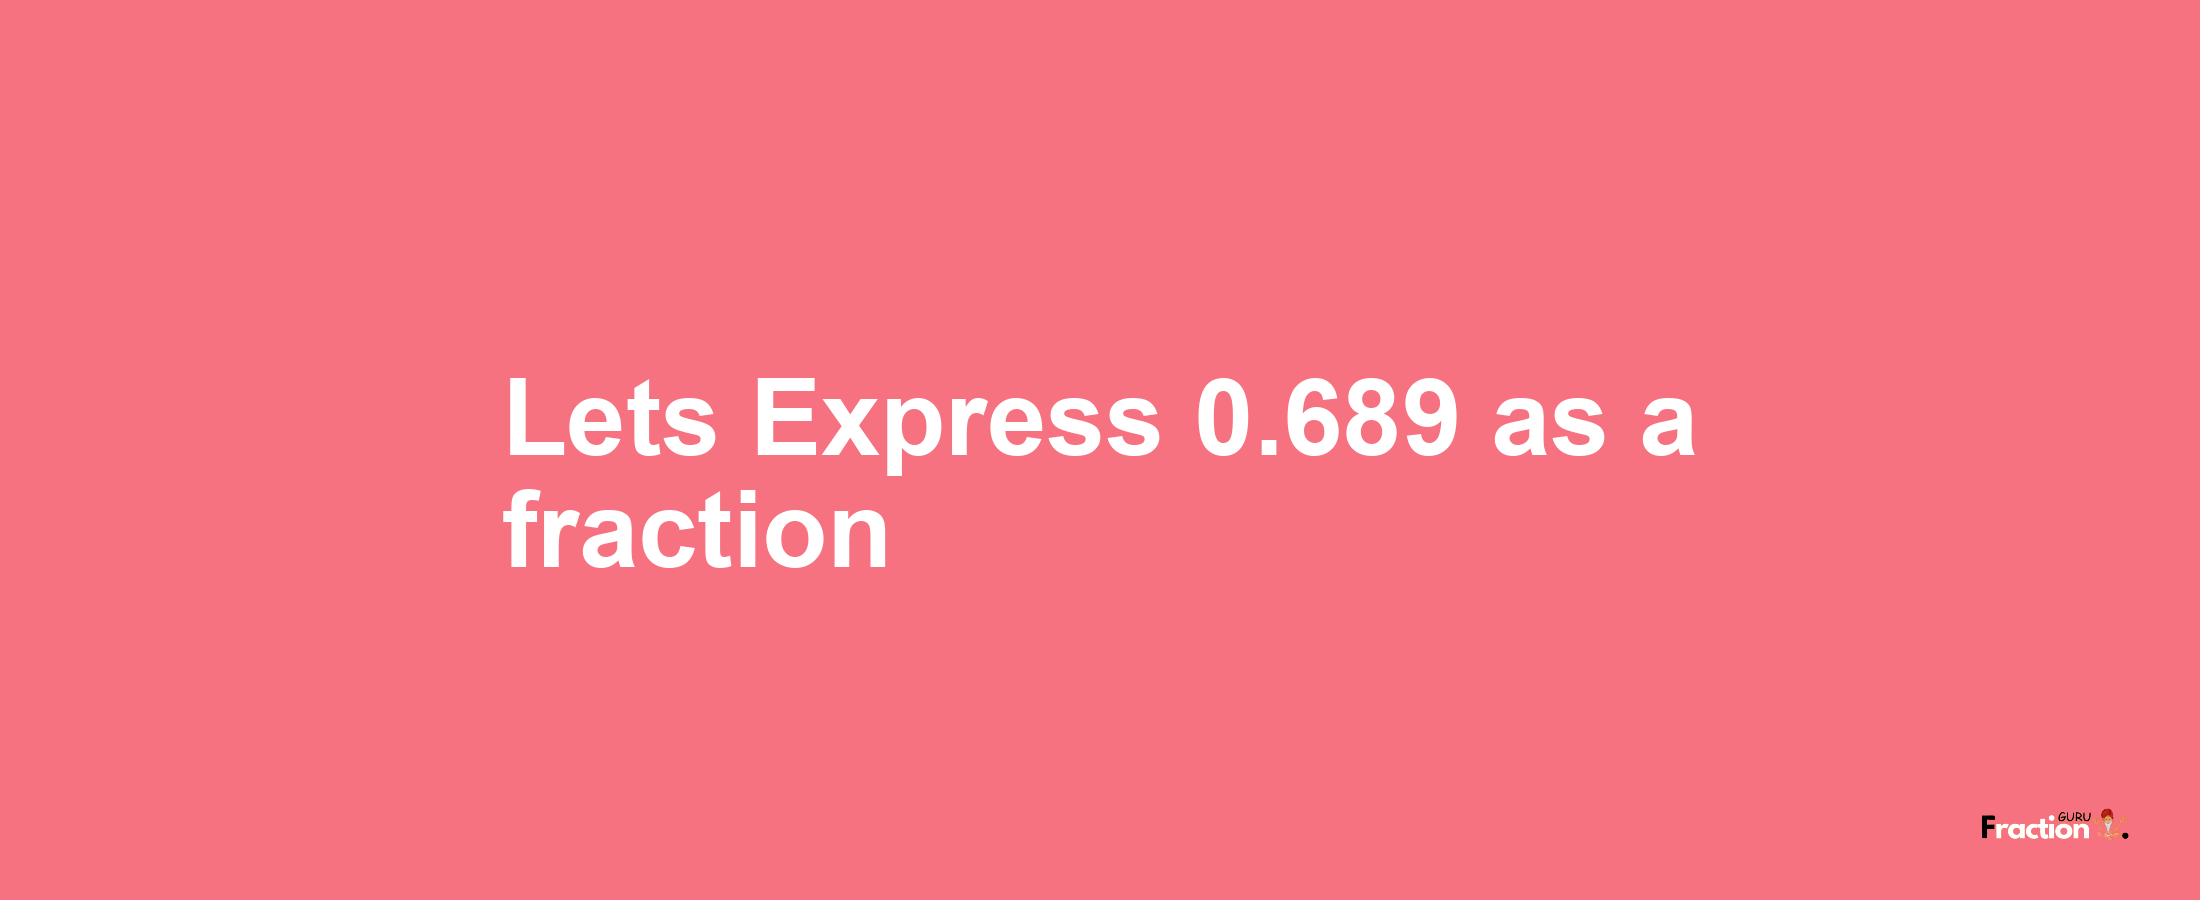 Lets Express 0.689 as afraction